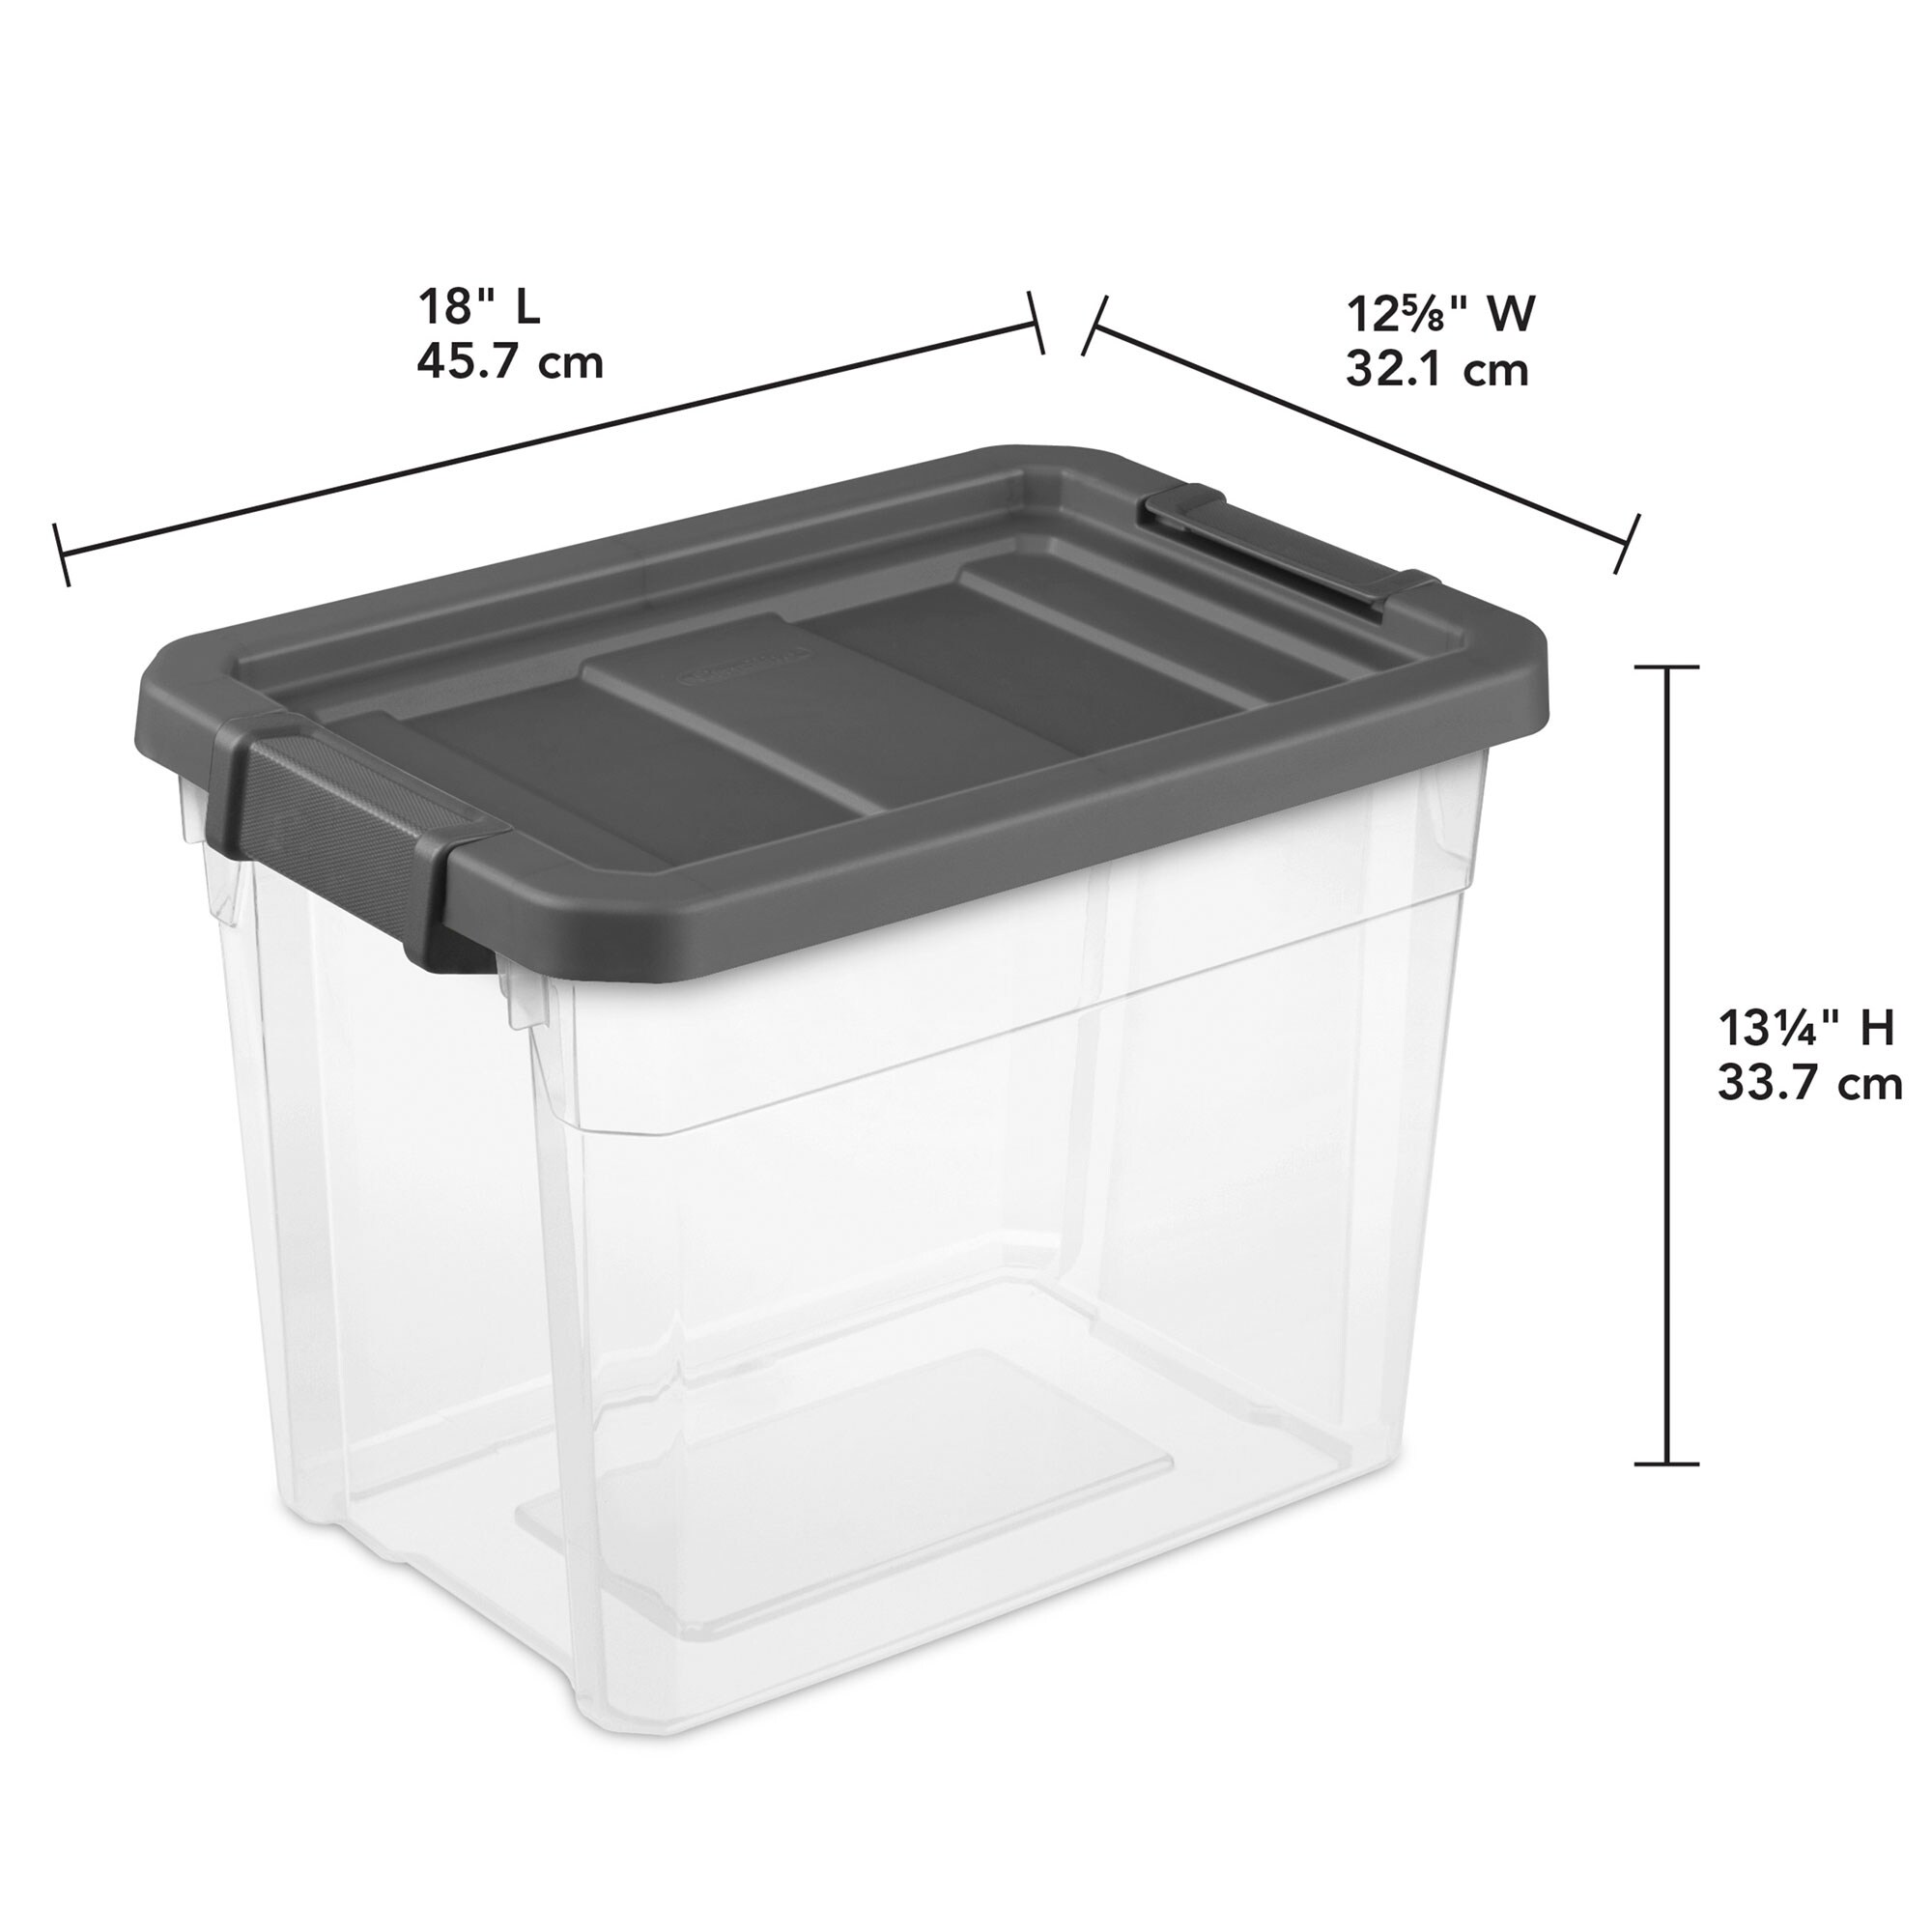 https://ak1.ostkcdn.com/images/products/is/images/direct/d81ecd3d9ea451cd9eb46ea648e41ba05b043d8f/Sterilite-30-Qt-Clear-Plastic-Storage-Bin-Totes-w--Latching-Lid%2C-Grey-%2812-Pack%29.jpg